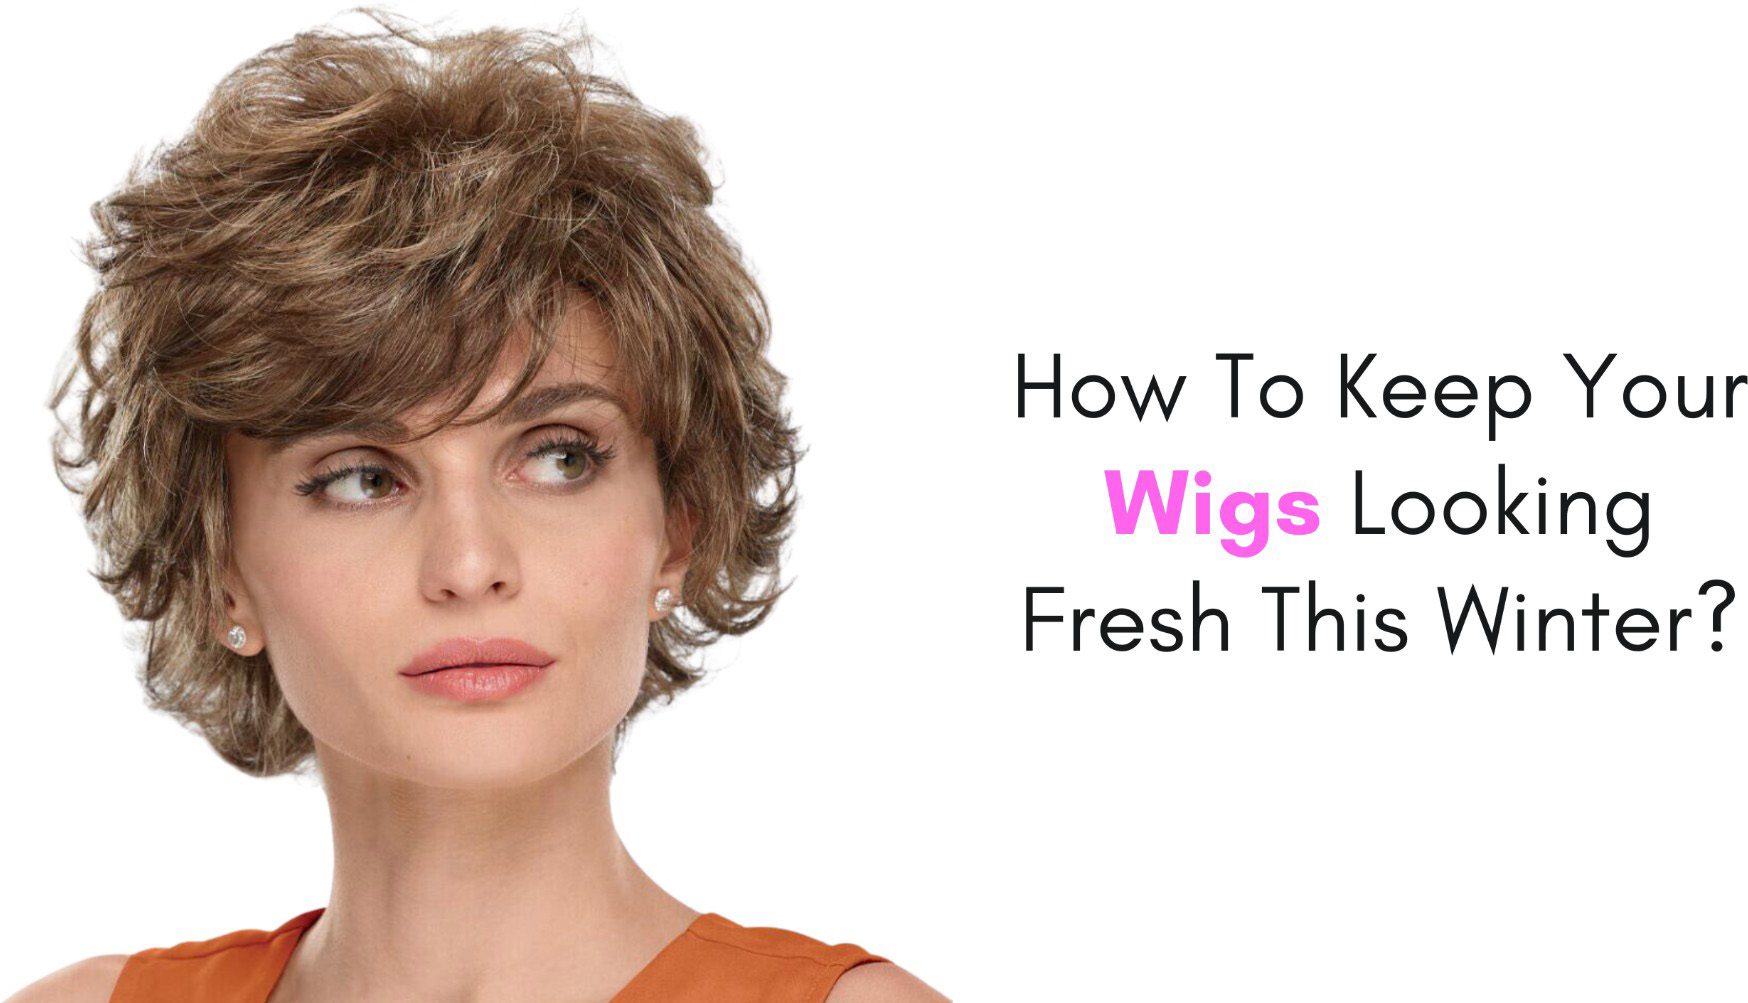 How To Keep Your Wigs Looking Fresh This Winter?